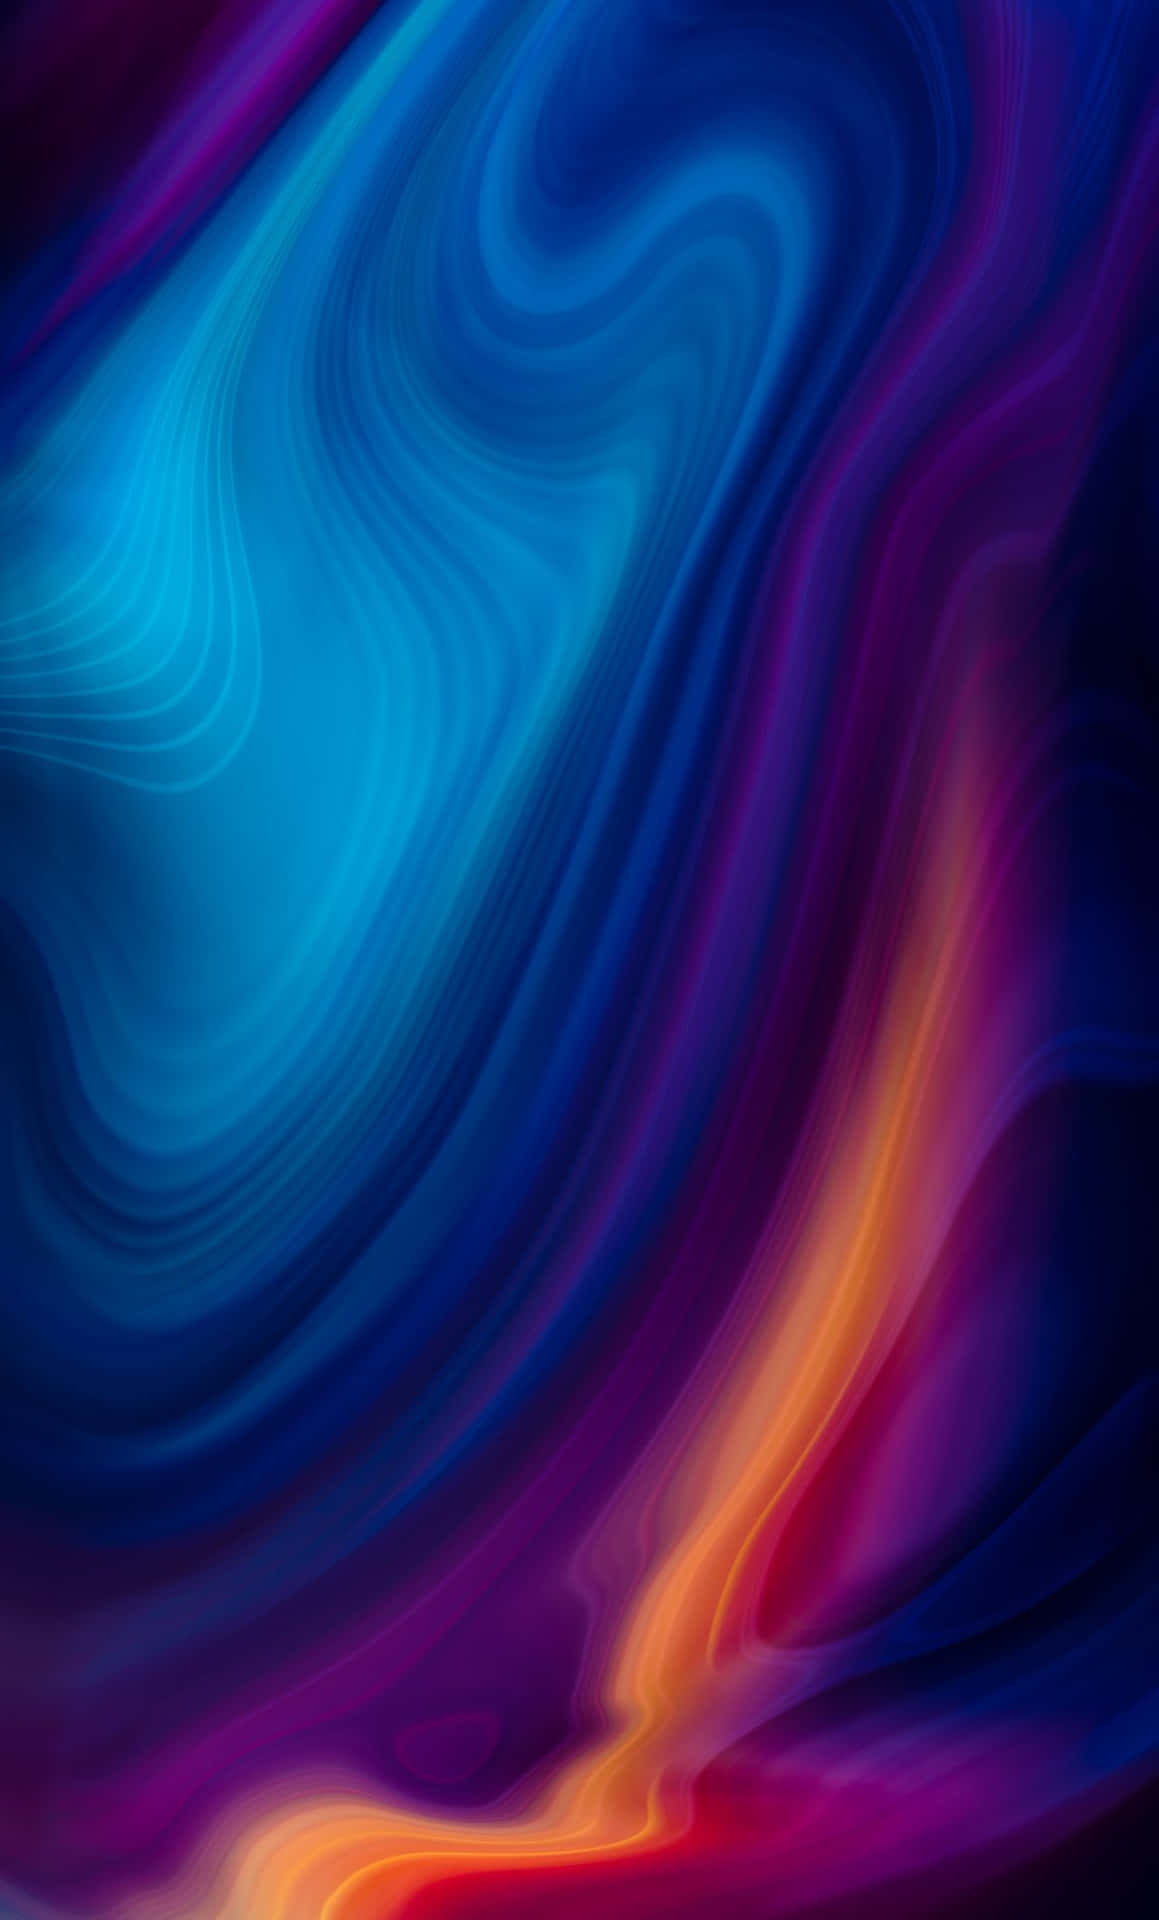 Abstract Background With Blue And Orange Colors